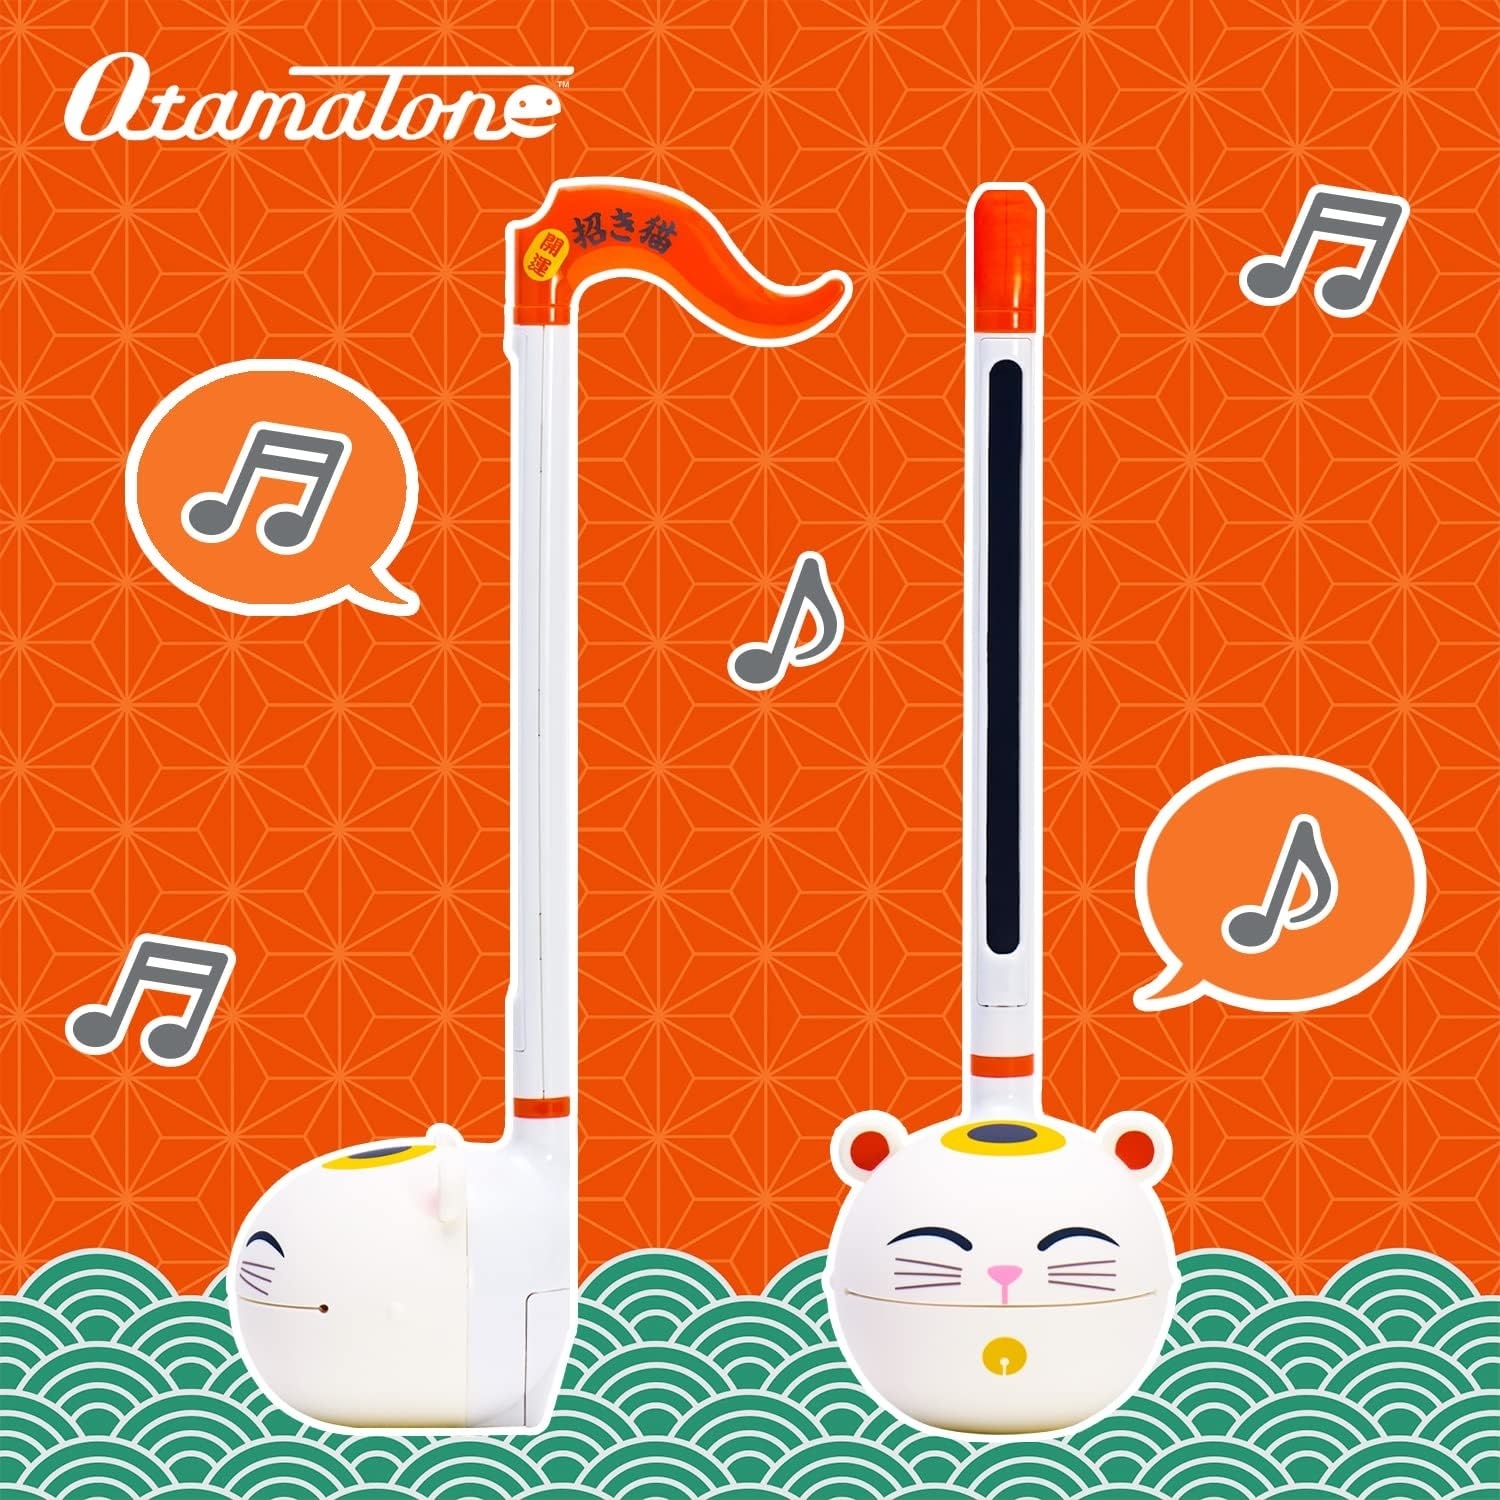 Lucky Cat-themed Otamatone with music notes around it